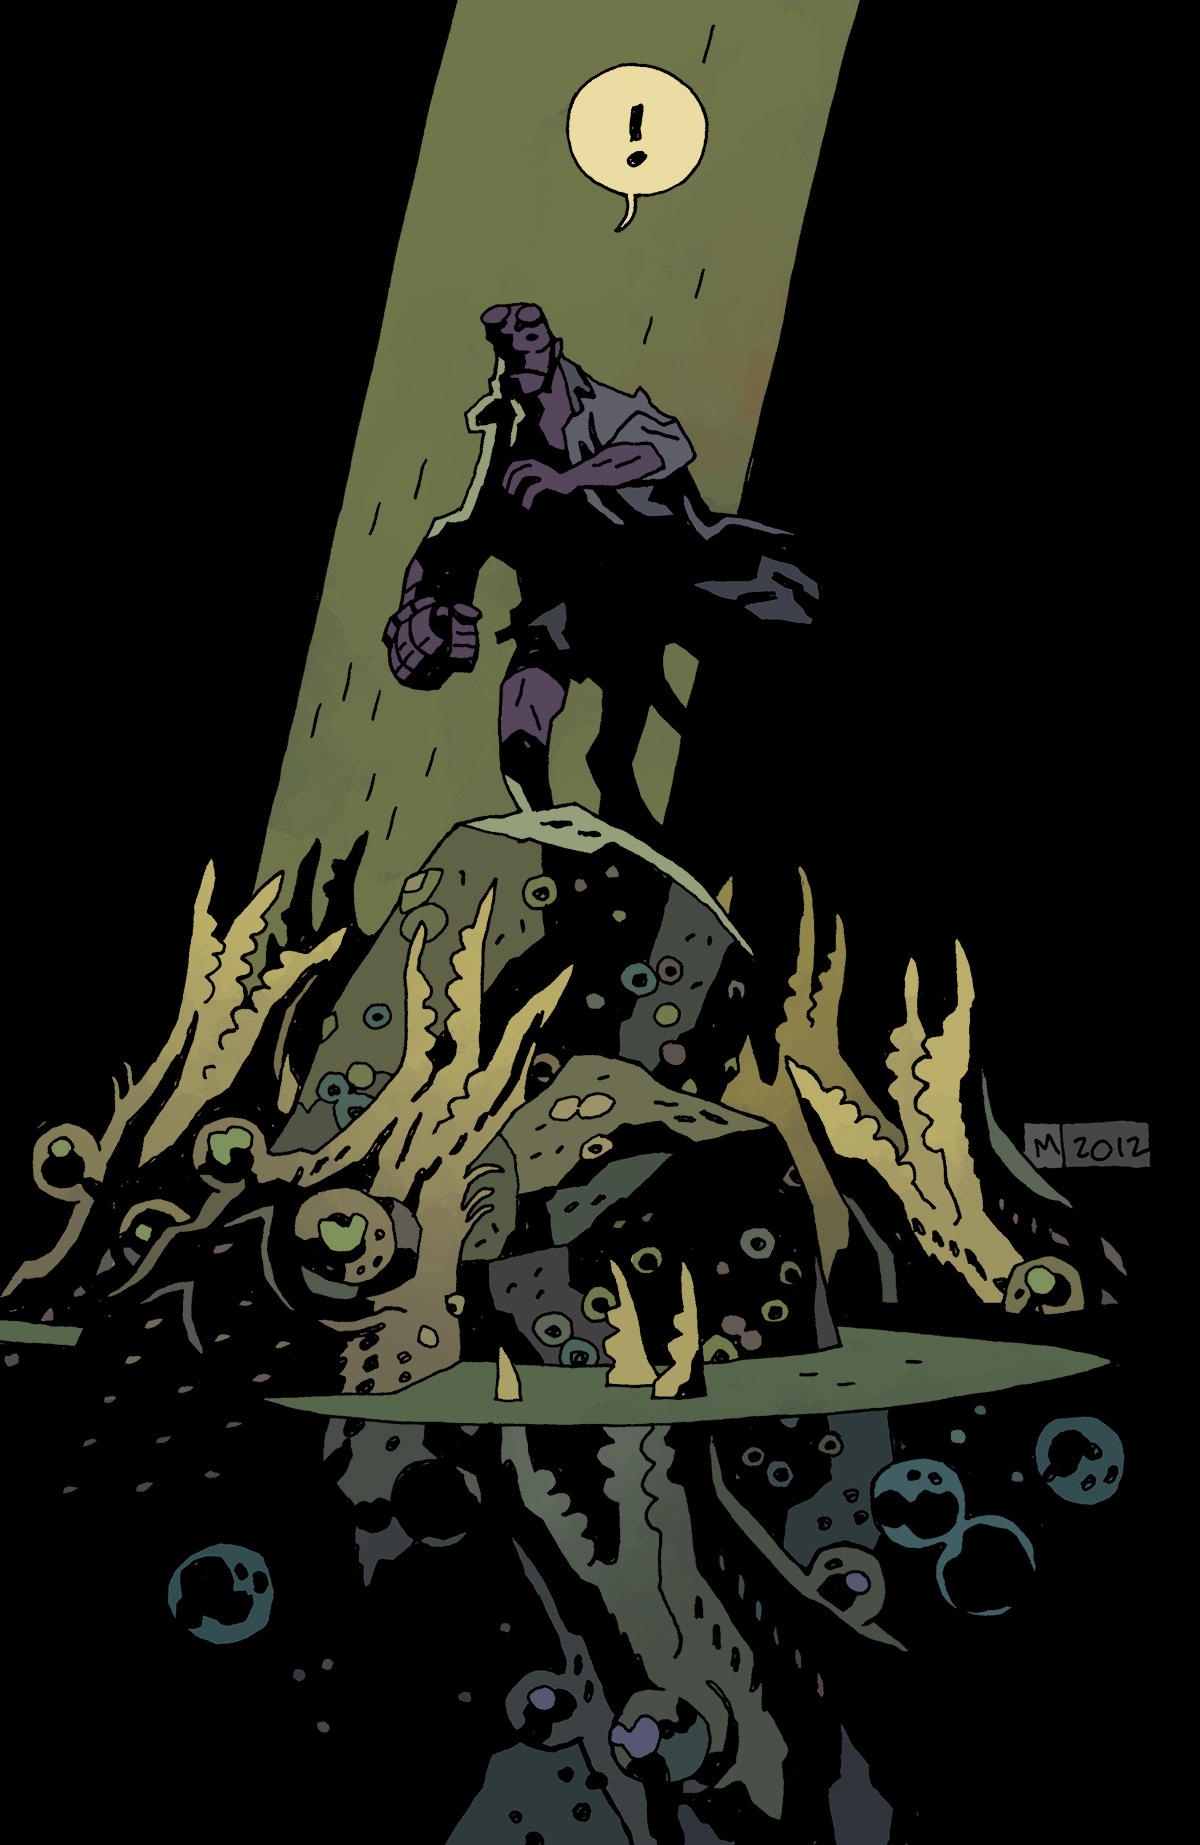 Hellboy In Hell #1 by Mike Mignola